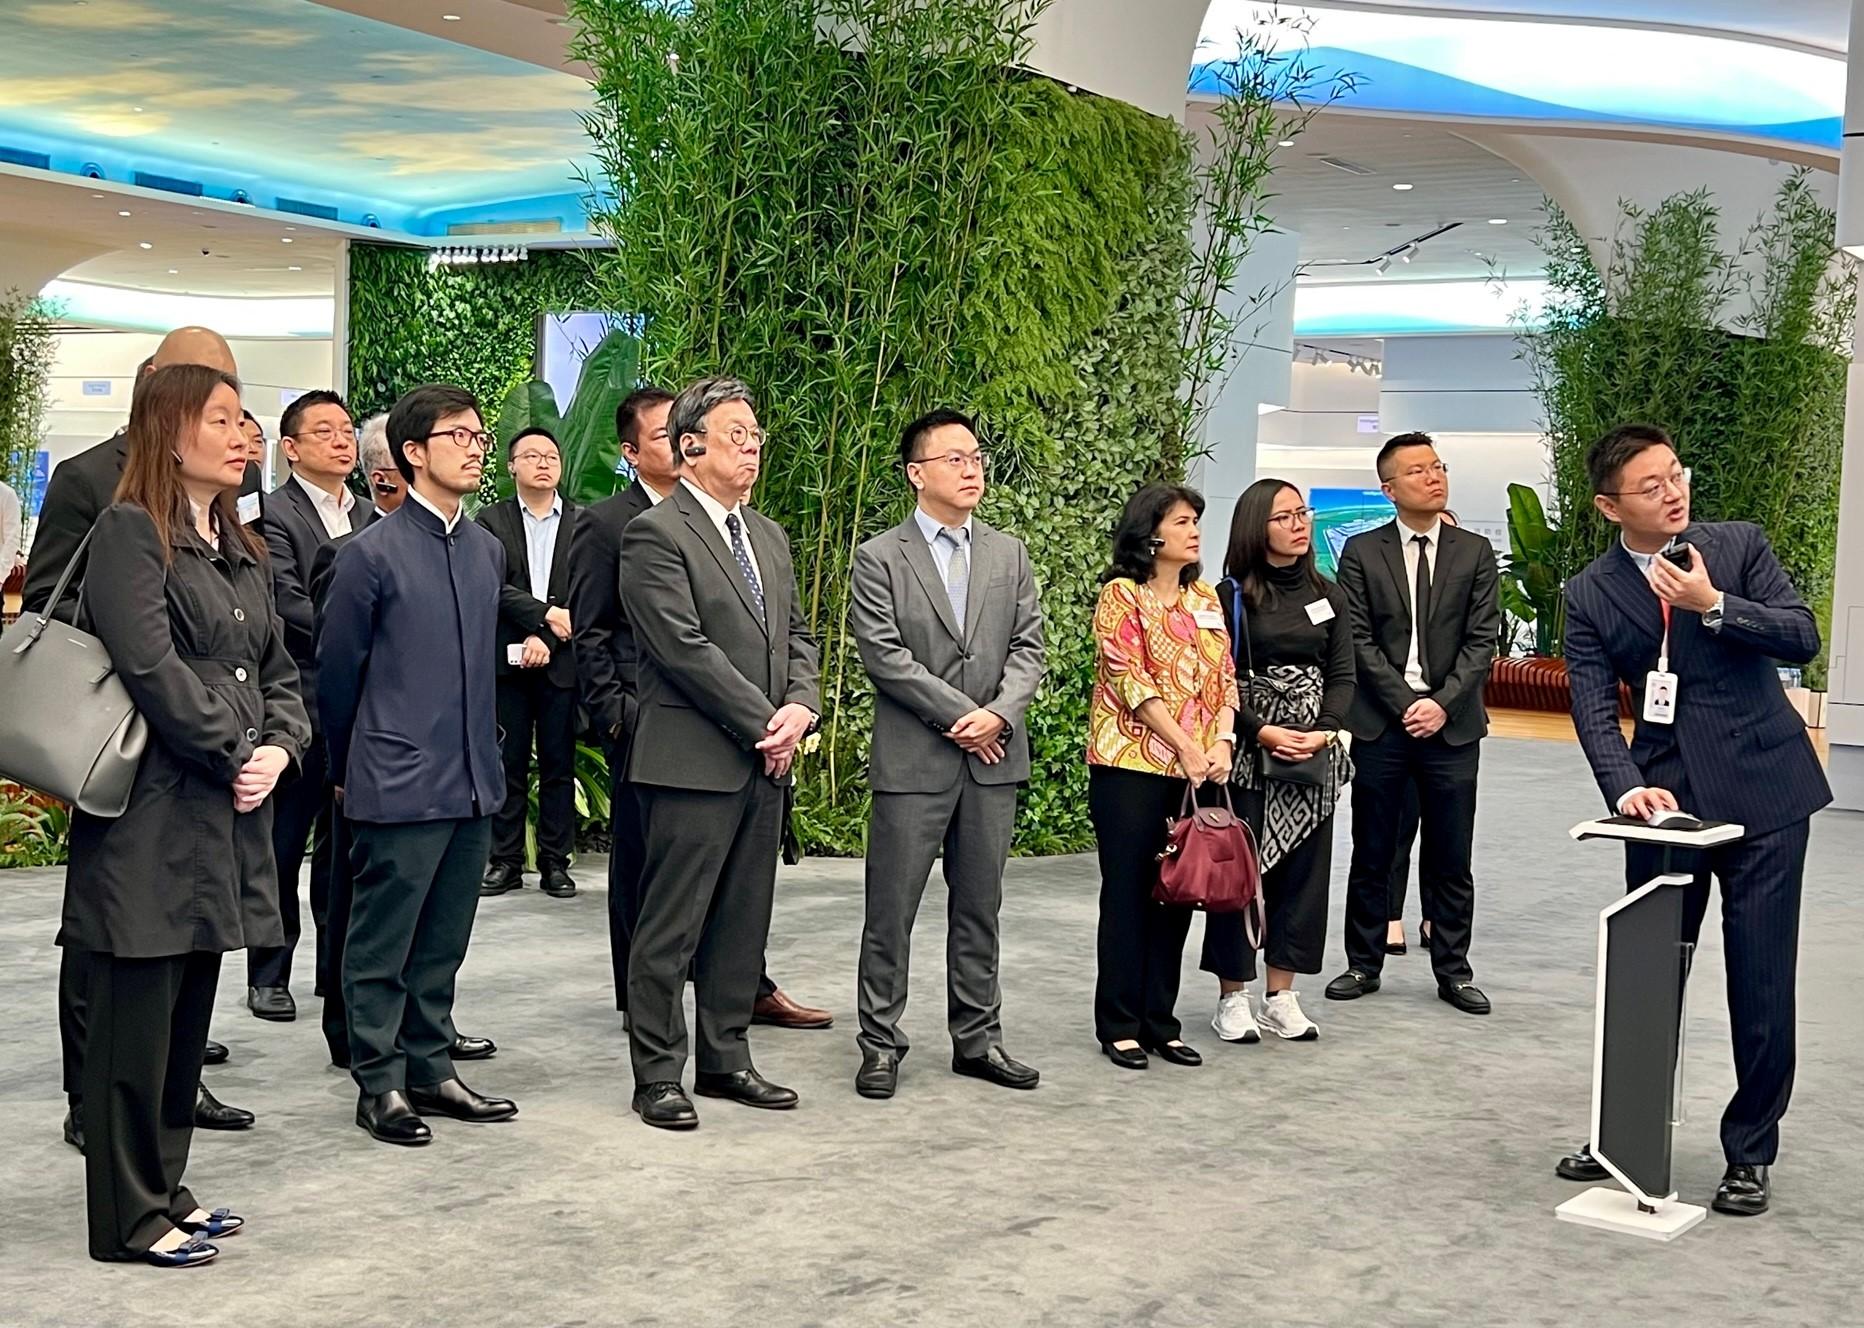 The business delegation of enterprises of Belt and Road countries operating in Hong Kong, led by the Secretary for Commerce and Economic Development, Mr Algernon Yau, continued the visit to the Guangdong-Hong Kong-Macao Greater Bay Area today (December 5). Photo shows Mr Yau (front row, third left) and delegates visiting the Huawei Headquarters in Shenzhen and being briefed by a representative of Huawei Technologies Co Ltd on the company's latest developments. Looking on is the Commissioner for Belt and Road, Mr Nicholas Ho (front row, second left), and the Director of the Hong Kong Economic and Trade Office in Guangdong, Miss Linda So (front row, first left).